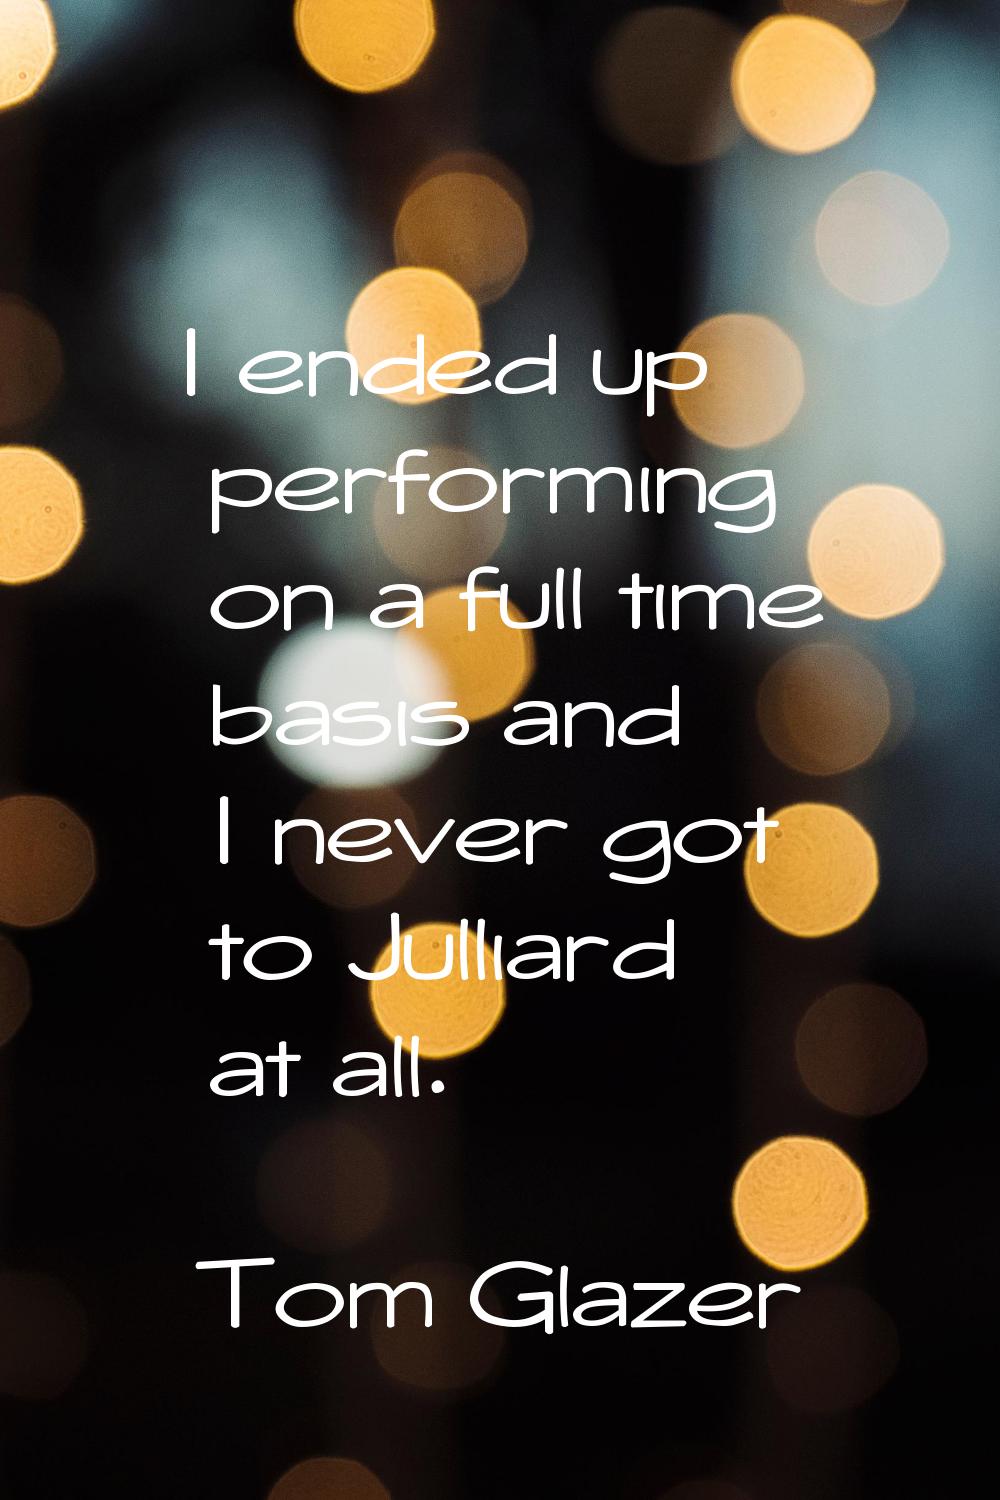 I ended up performing on a full time basis and I never got to Julliard at all.